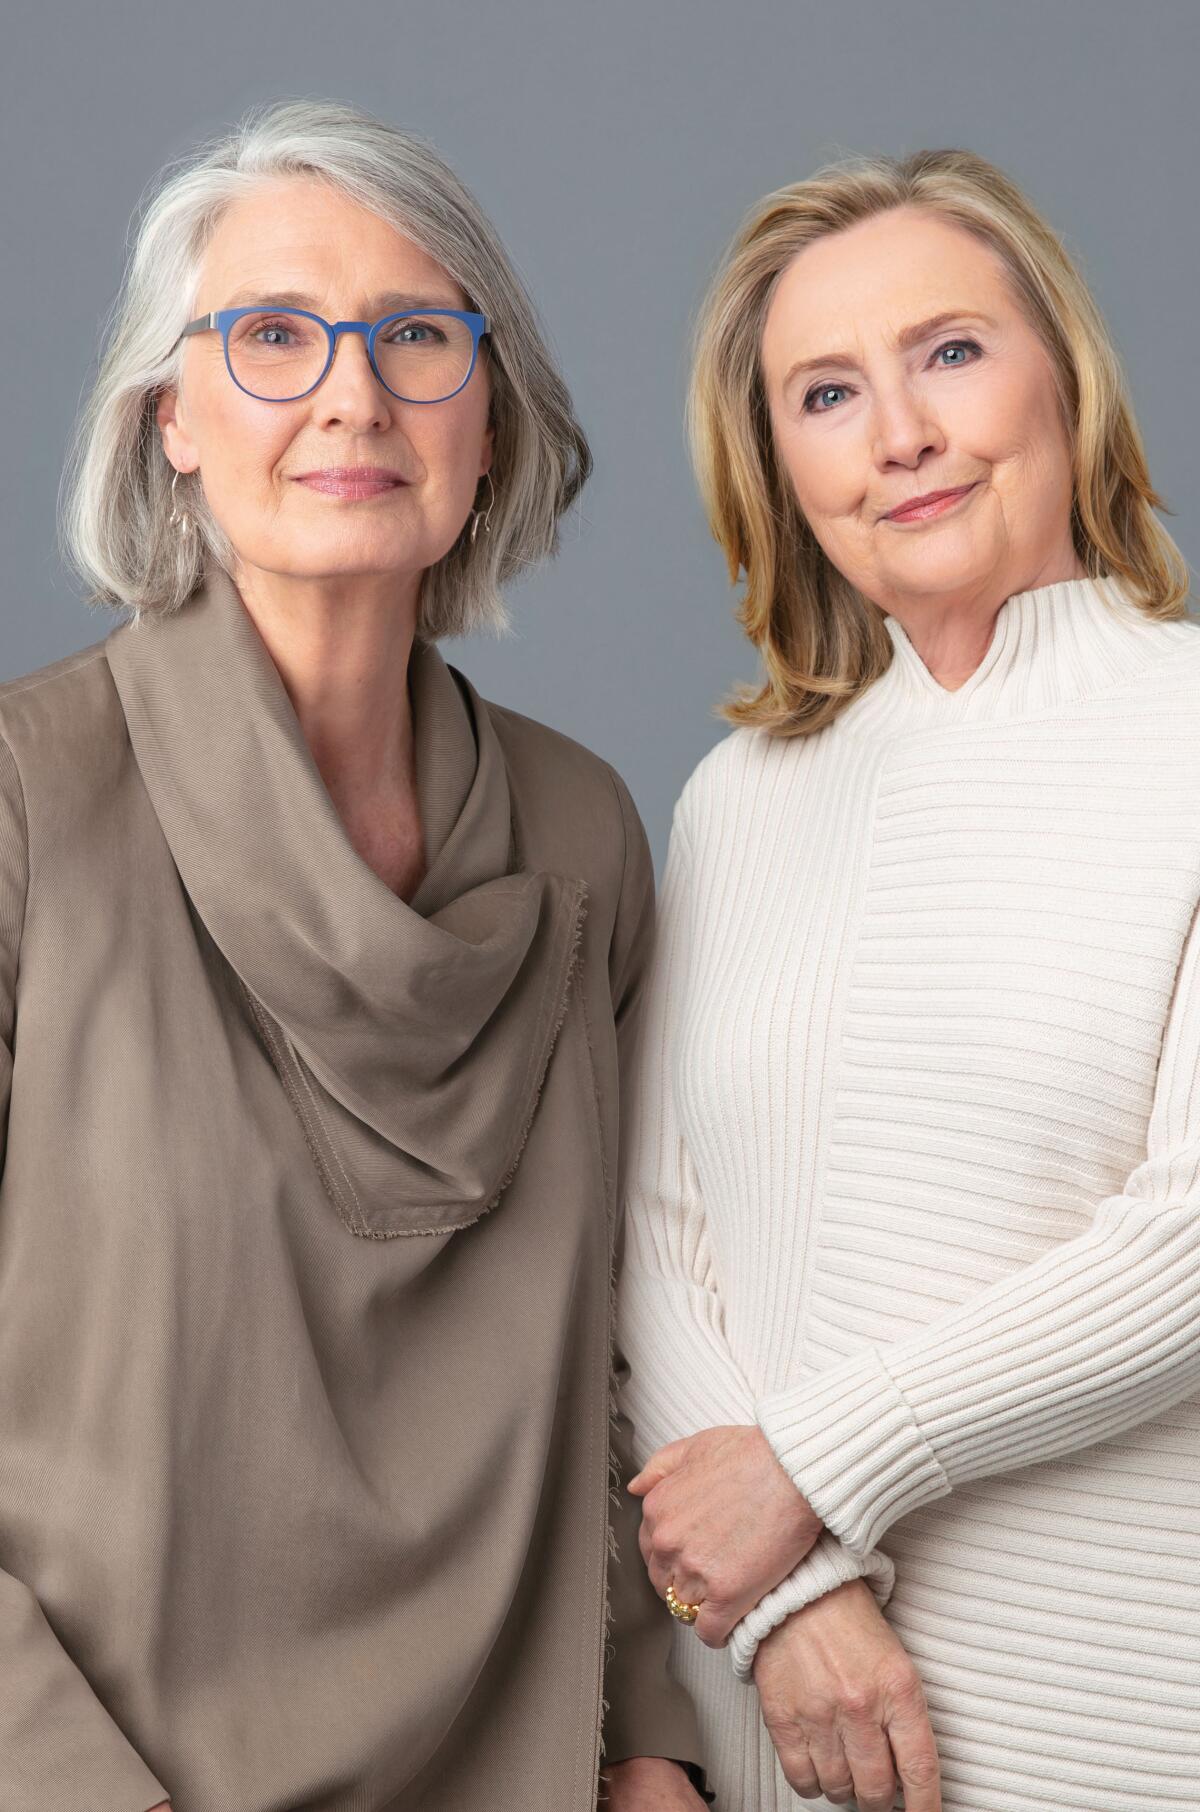 See cover of Hillary Clinton and Louise Penny's State of Terror